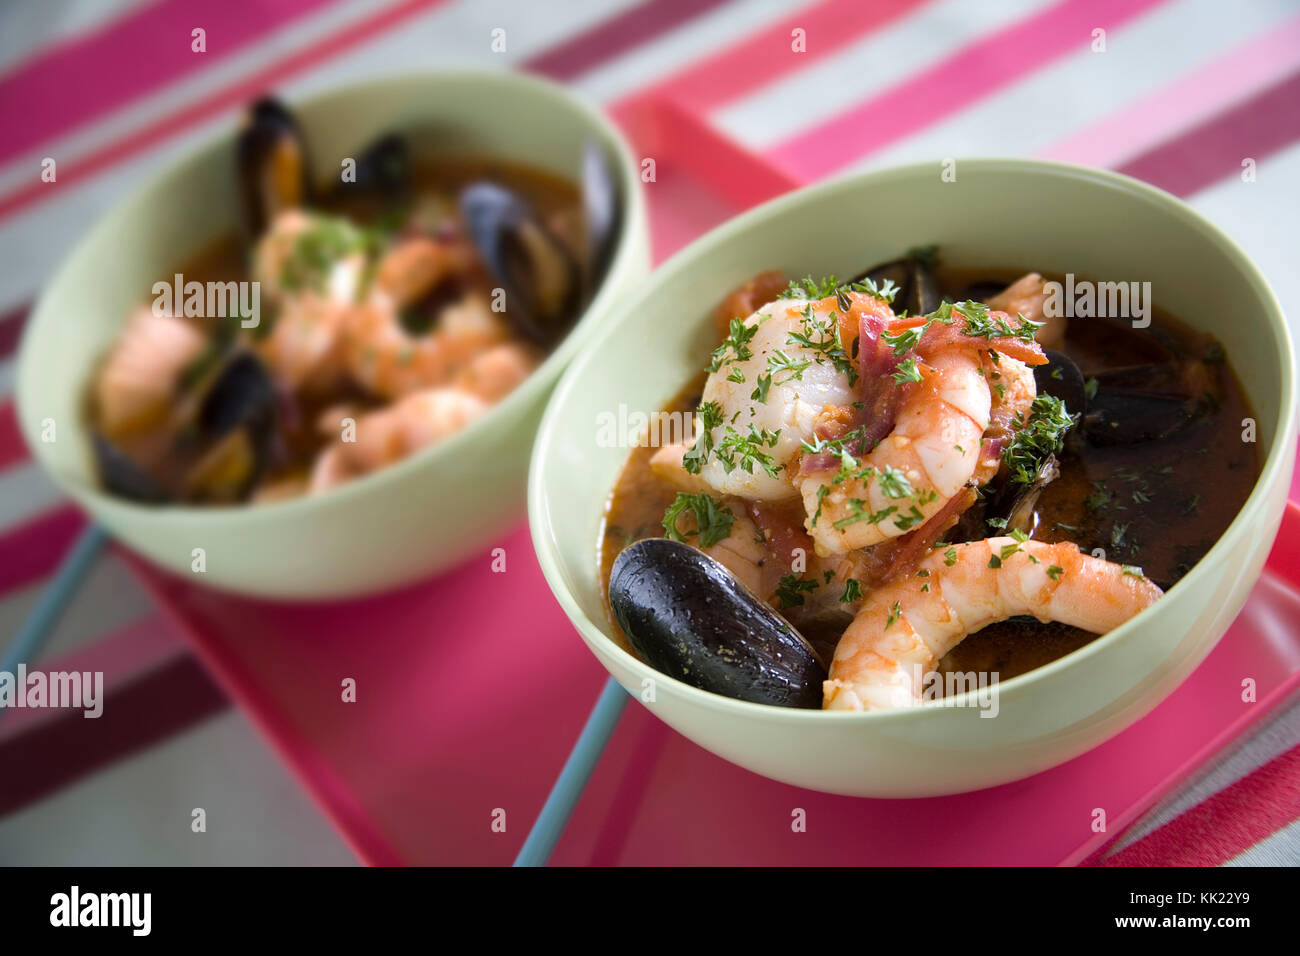 Shellfish soup with scallop, king prawns, mussels and clams garnished with chopped fresh parsley Stock Photo